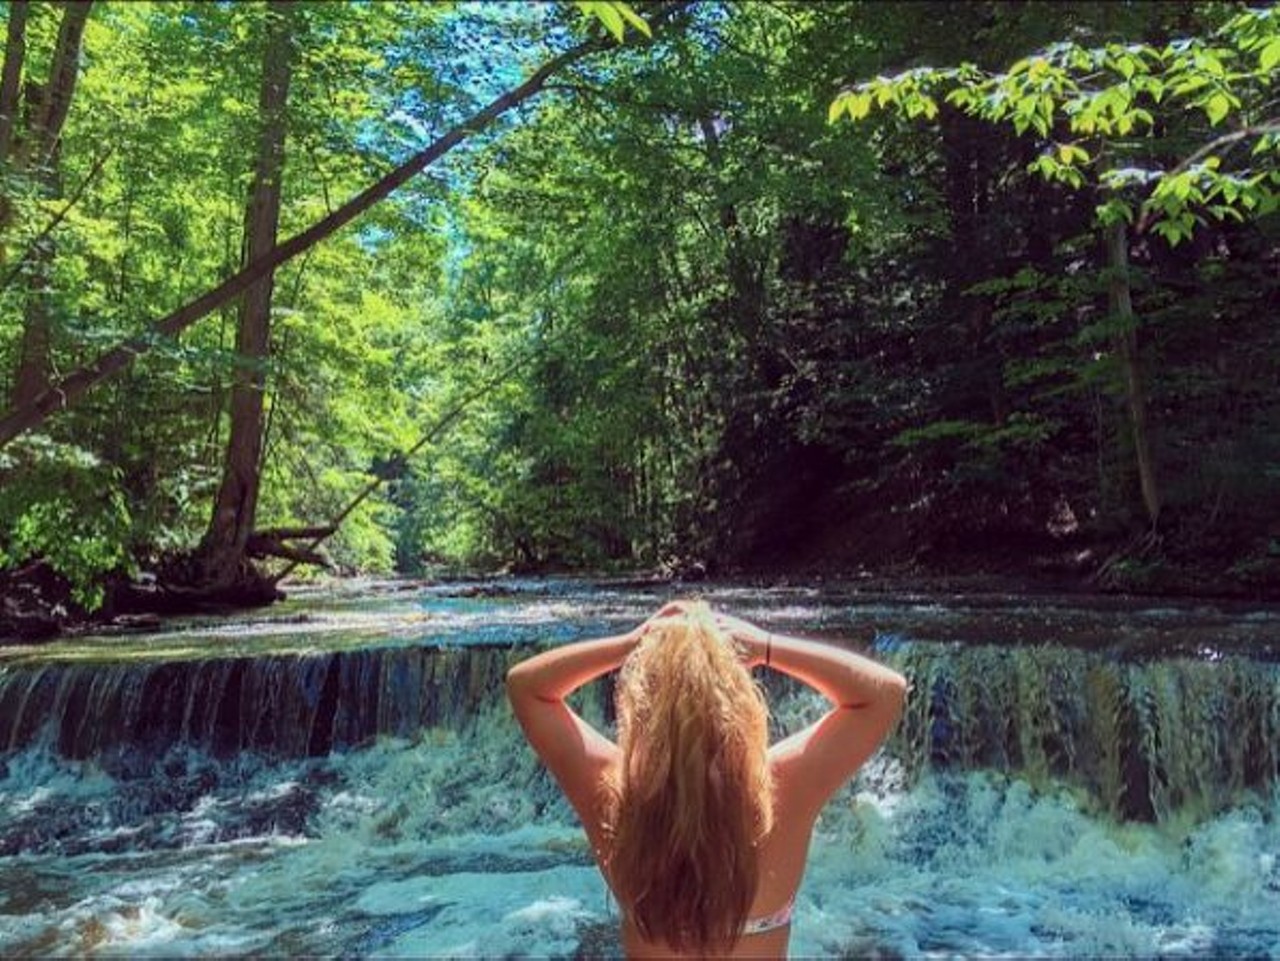  Chair Factory Falls
Jordan Creek, Painesville
This big natural feature is accessible by a pedestrian trail off the Greenway Corridor. Plus, it's only about a 40 minute drive from Cleveland.
Photo via sam_ohly/Instagram